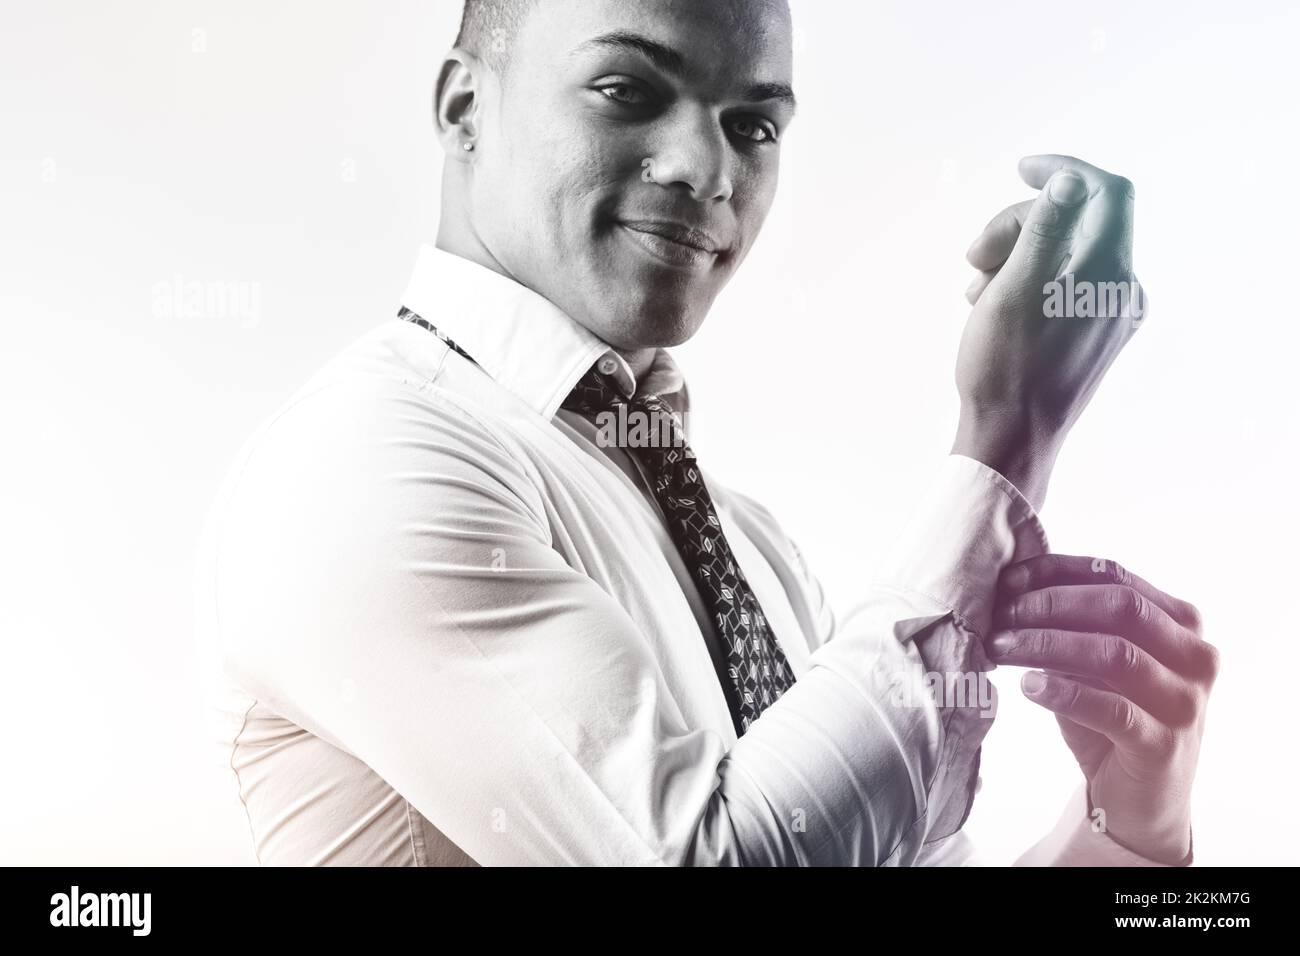 Handsome young Black man fastening the cuffs of his shirt Stock Photo